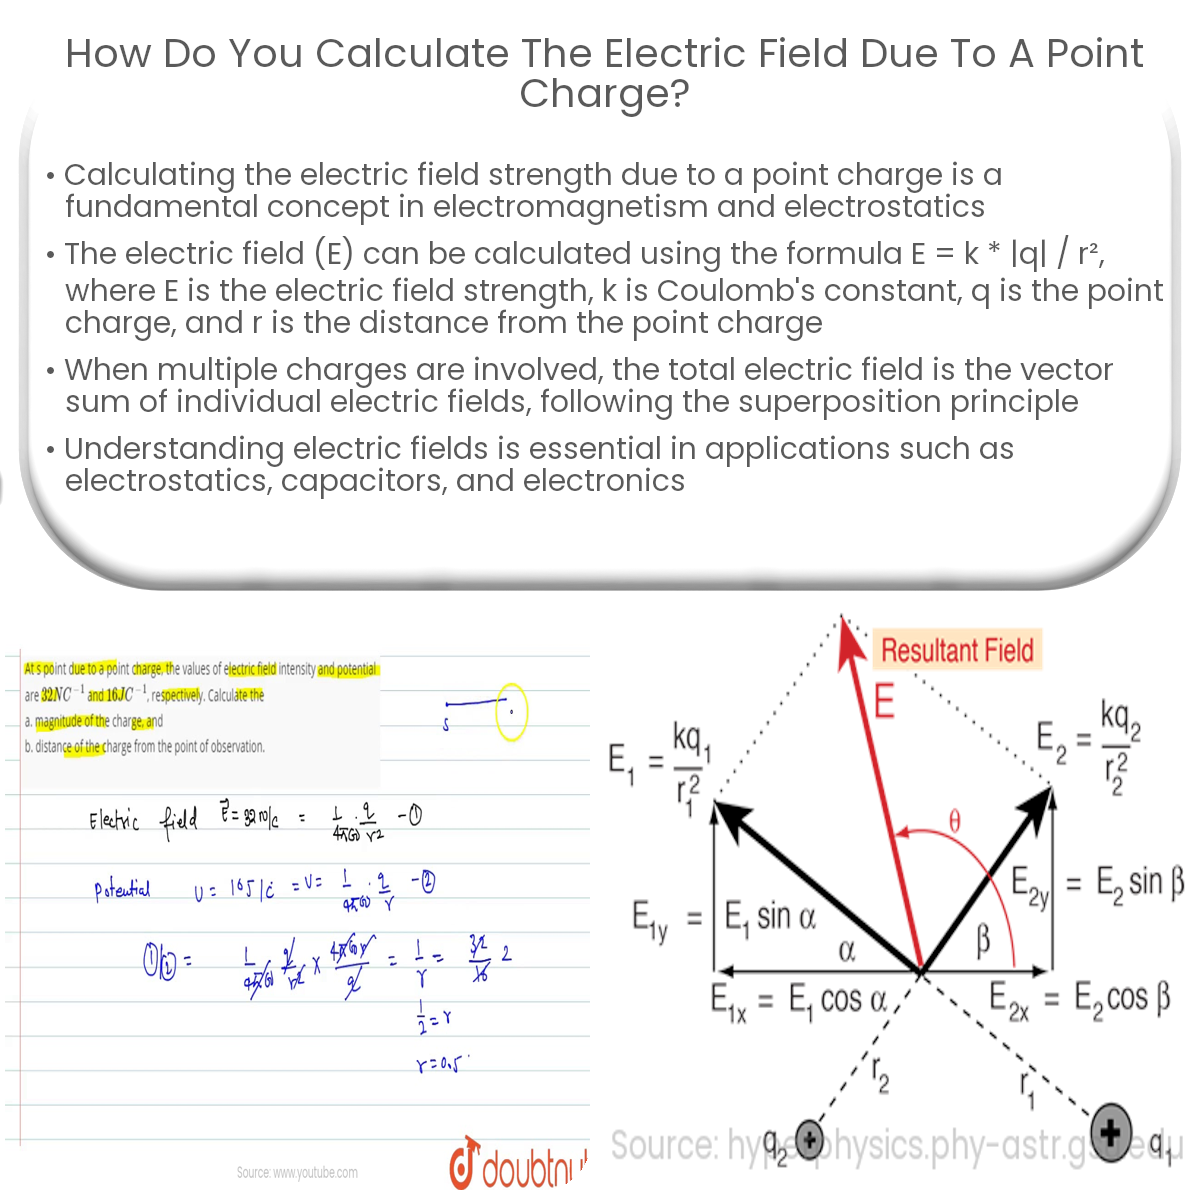 How do you calculate the electric field due to a point charge?